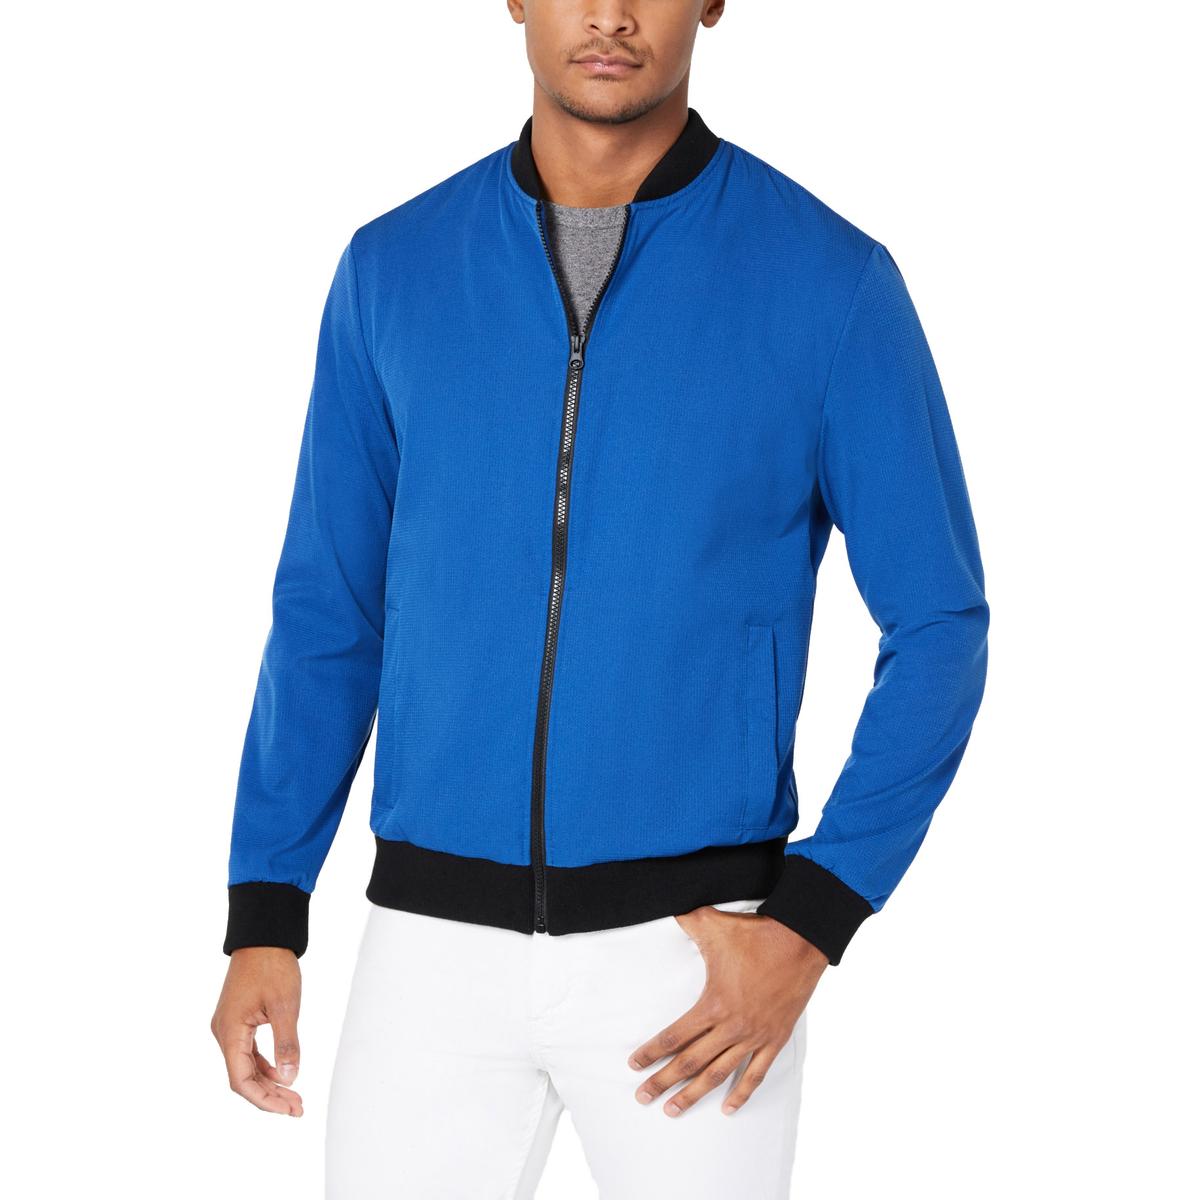 Kenneth Cole New York Mens Blue Spring Bomber Jacket Outerwear L BHFO ...